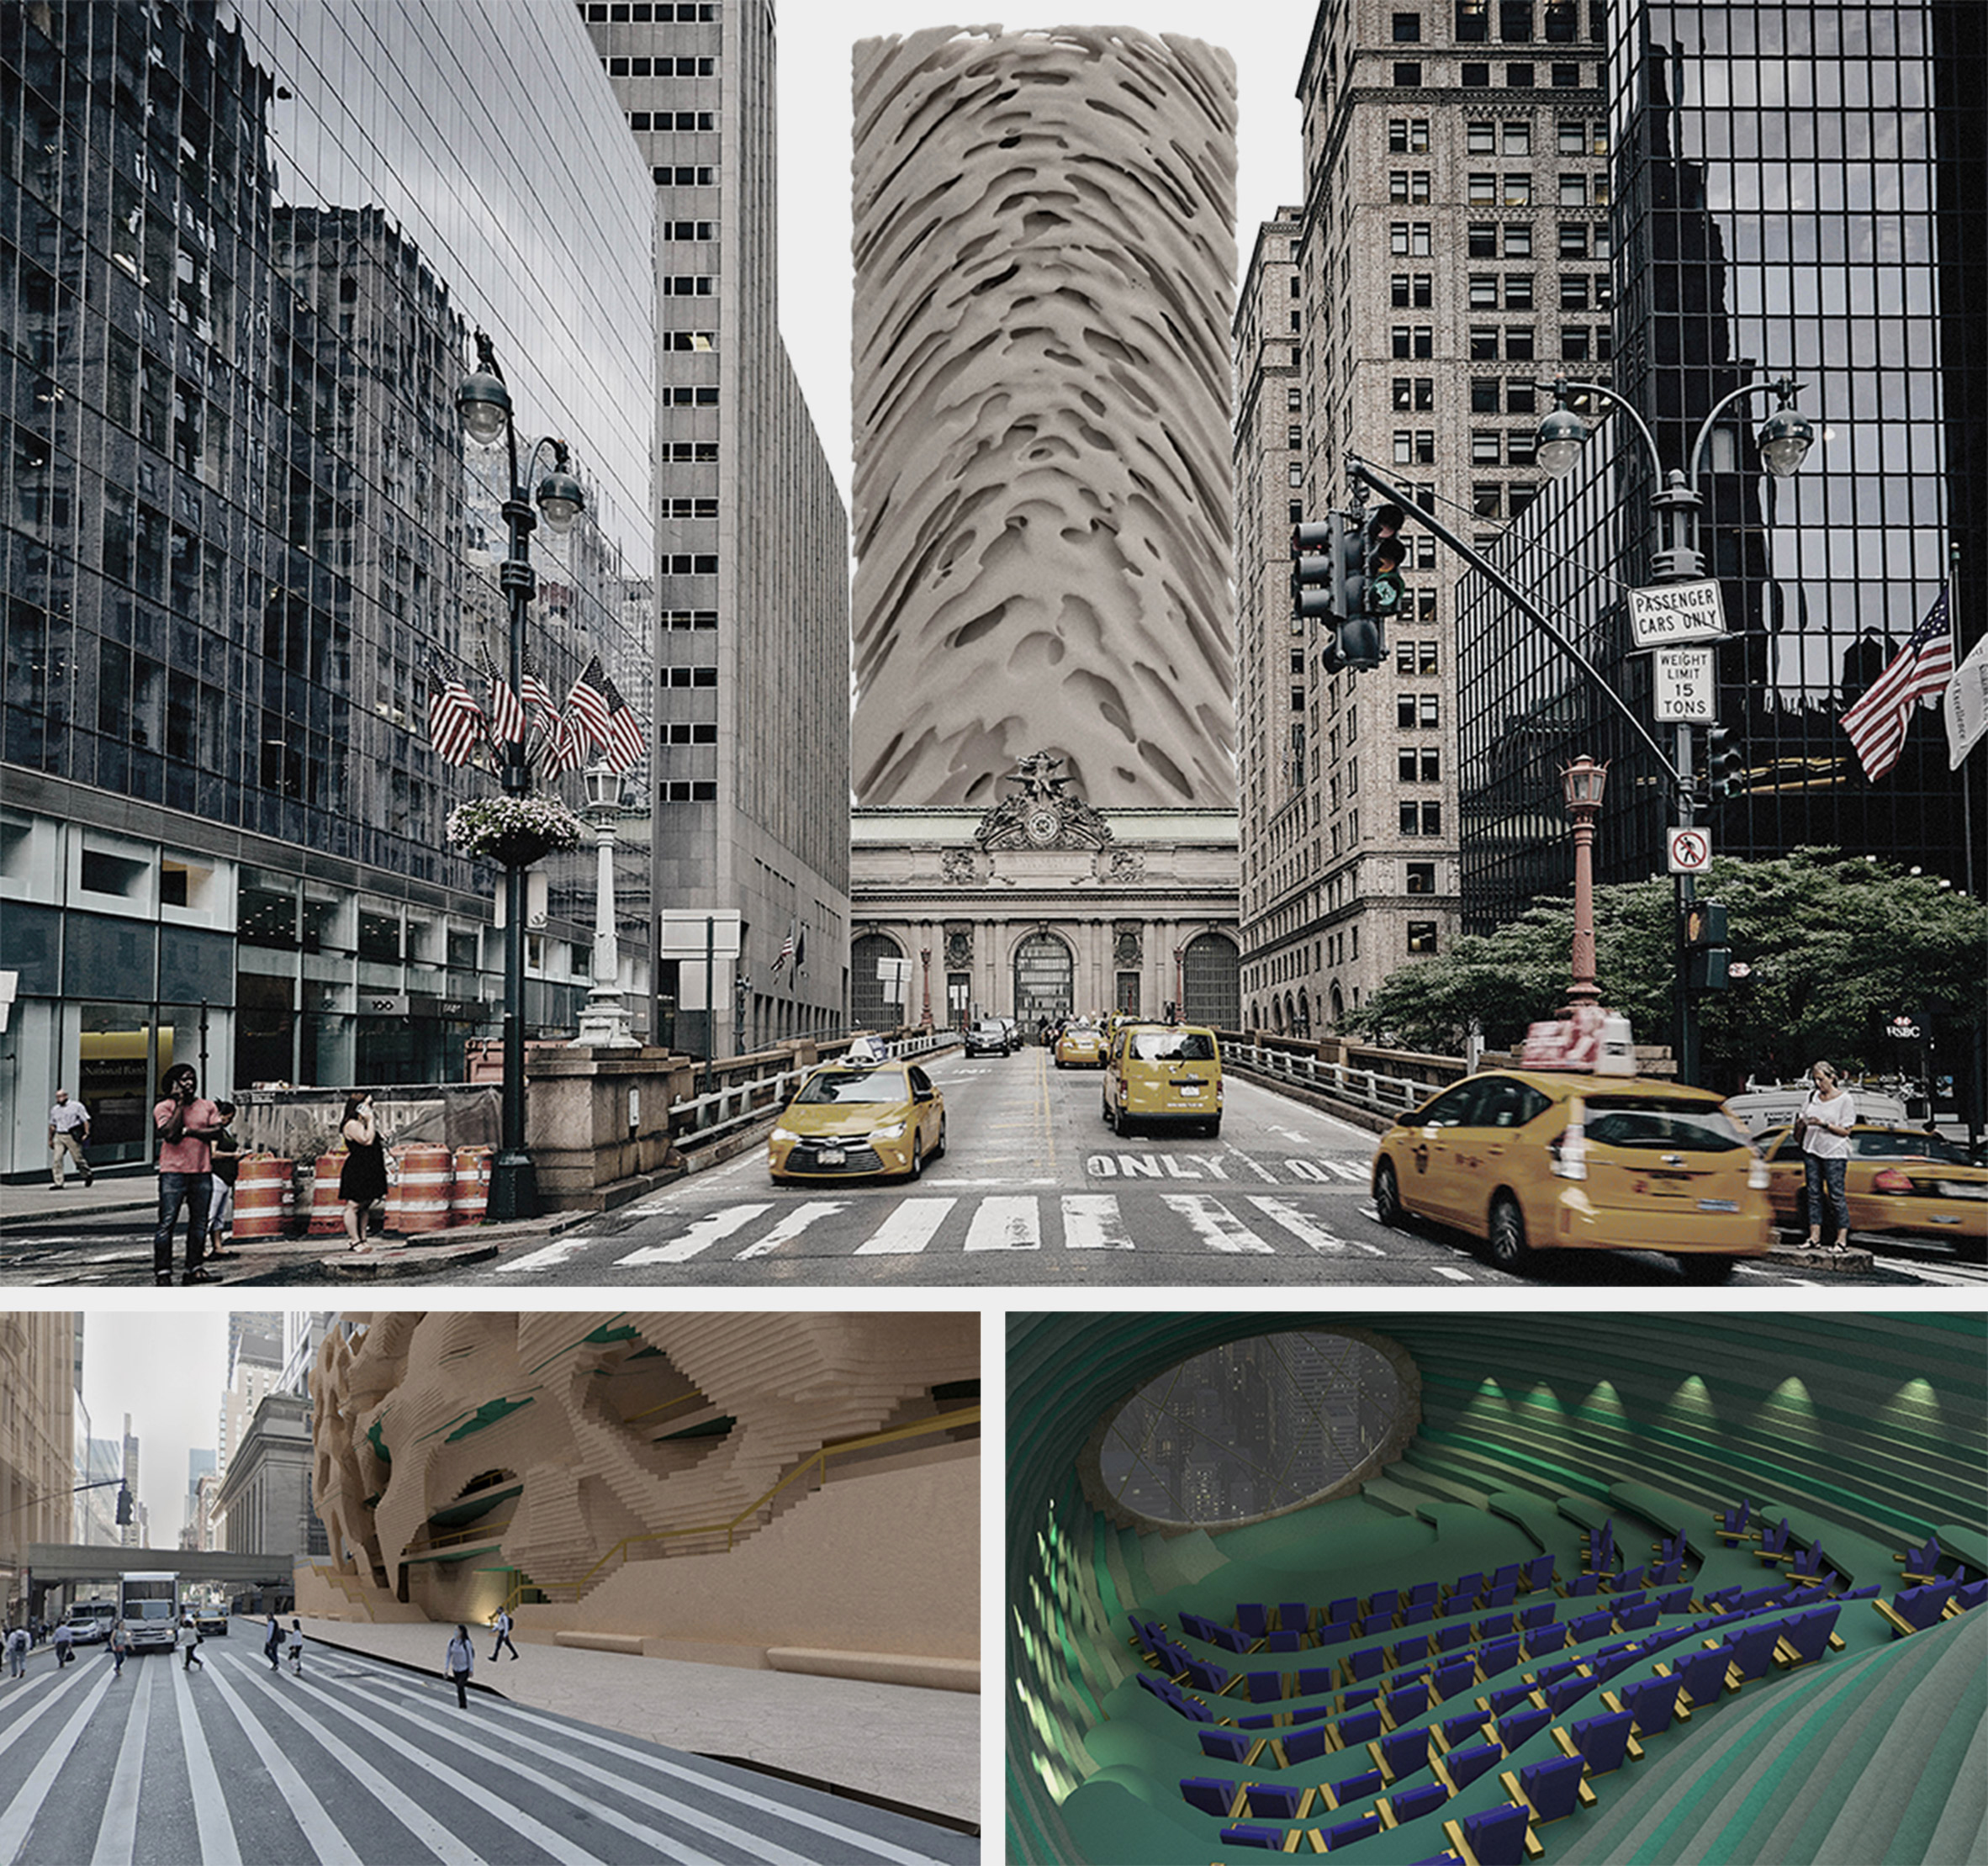 Collage of visualisations showing high rise